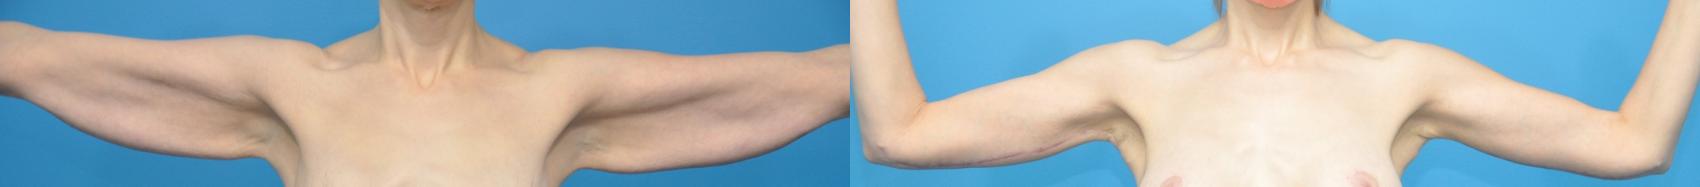 Before & After Arm Lift/ Brachioplasty Case 432 Front View in North Shore, IL